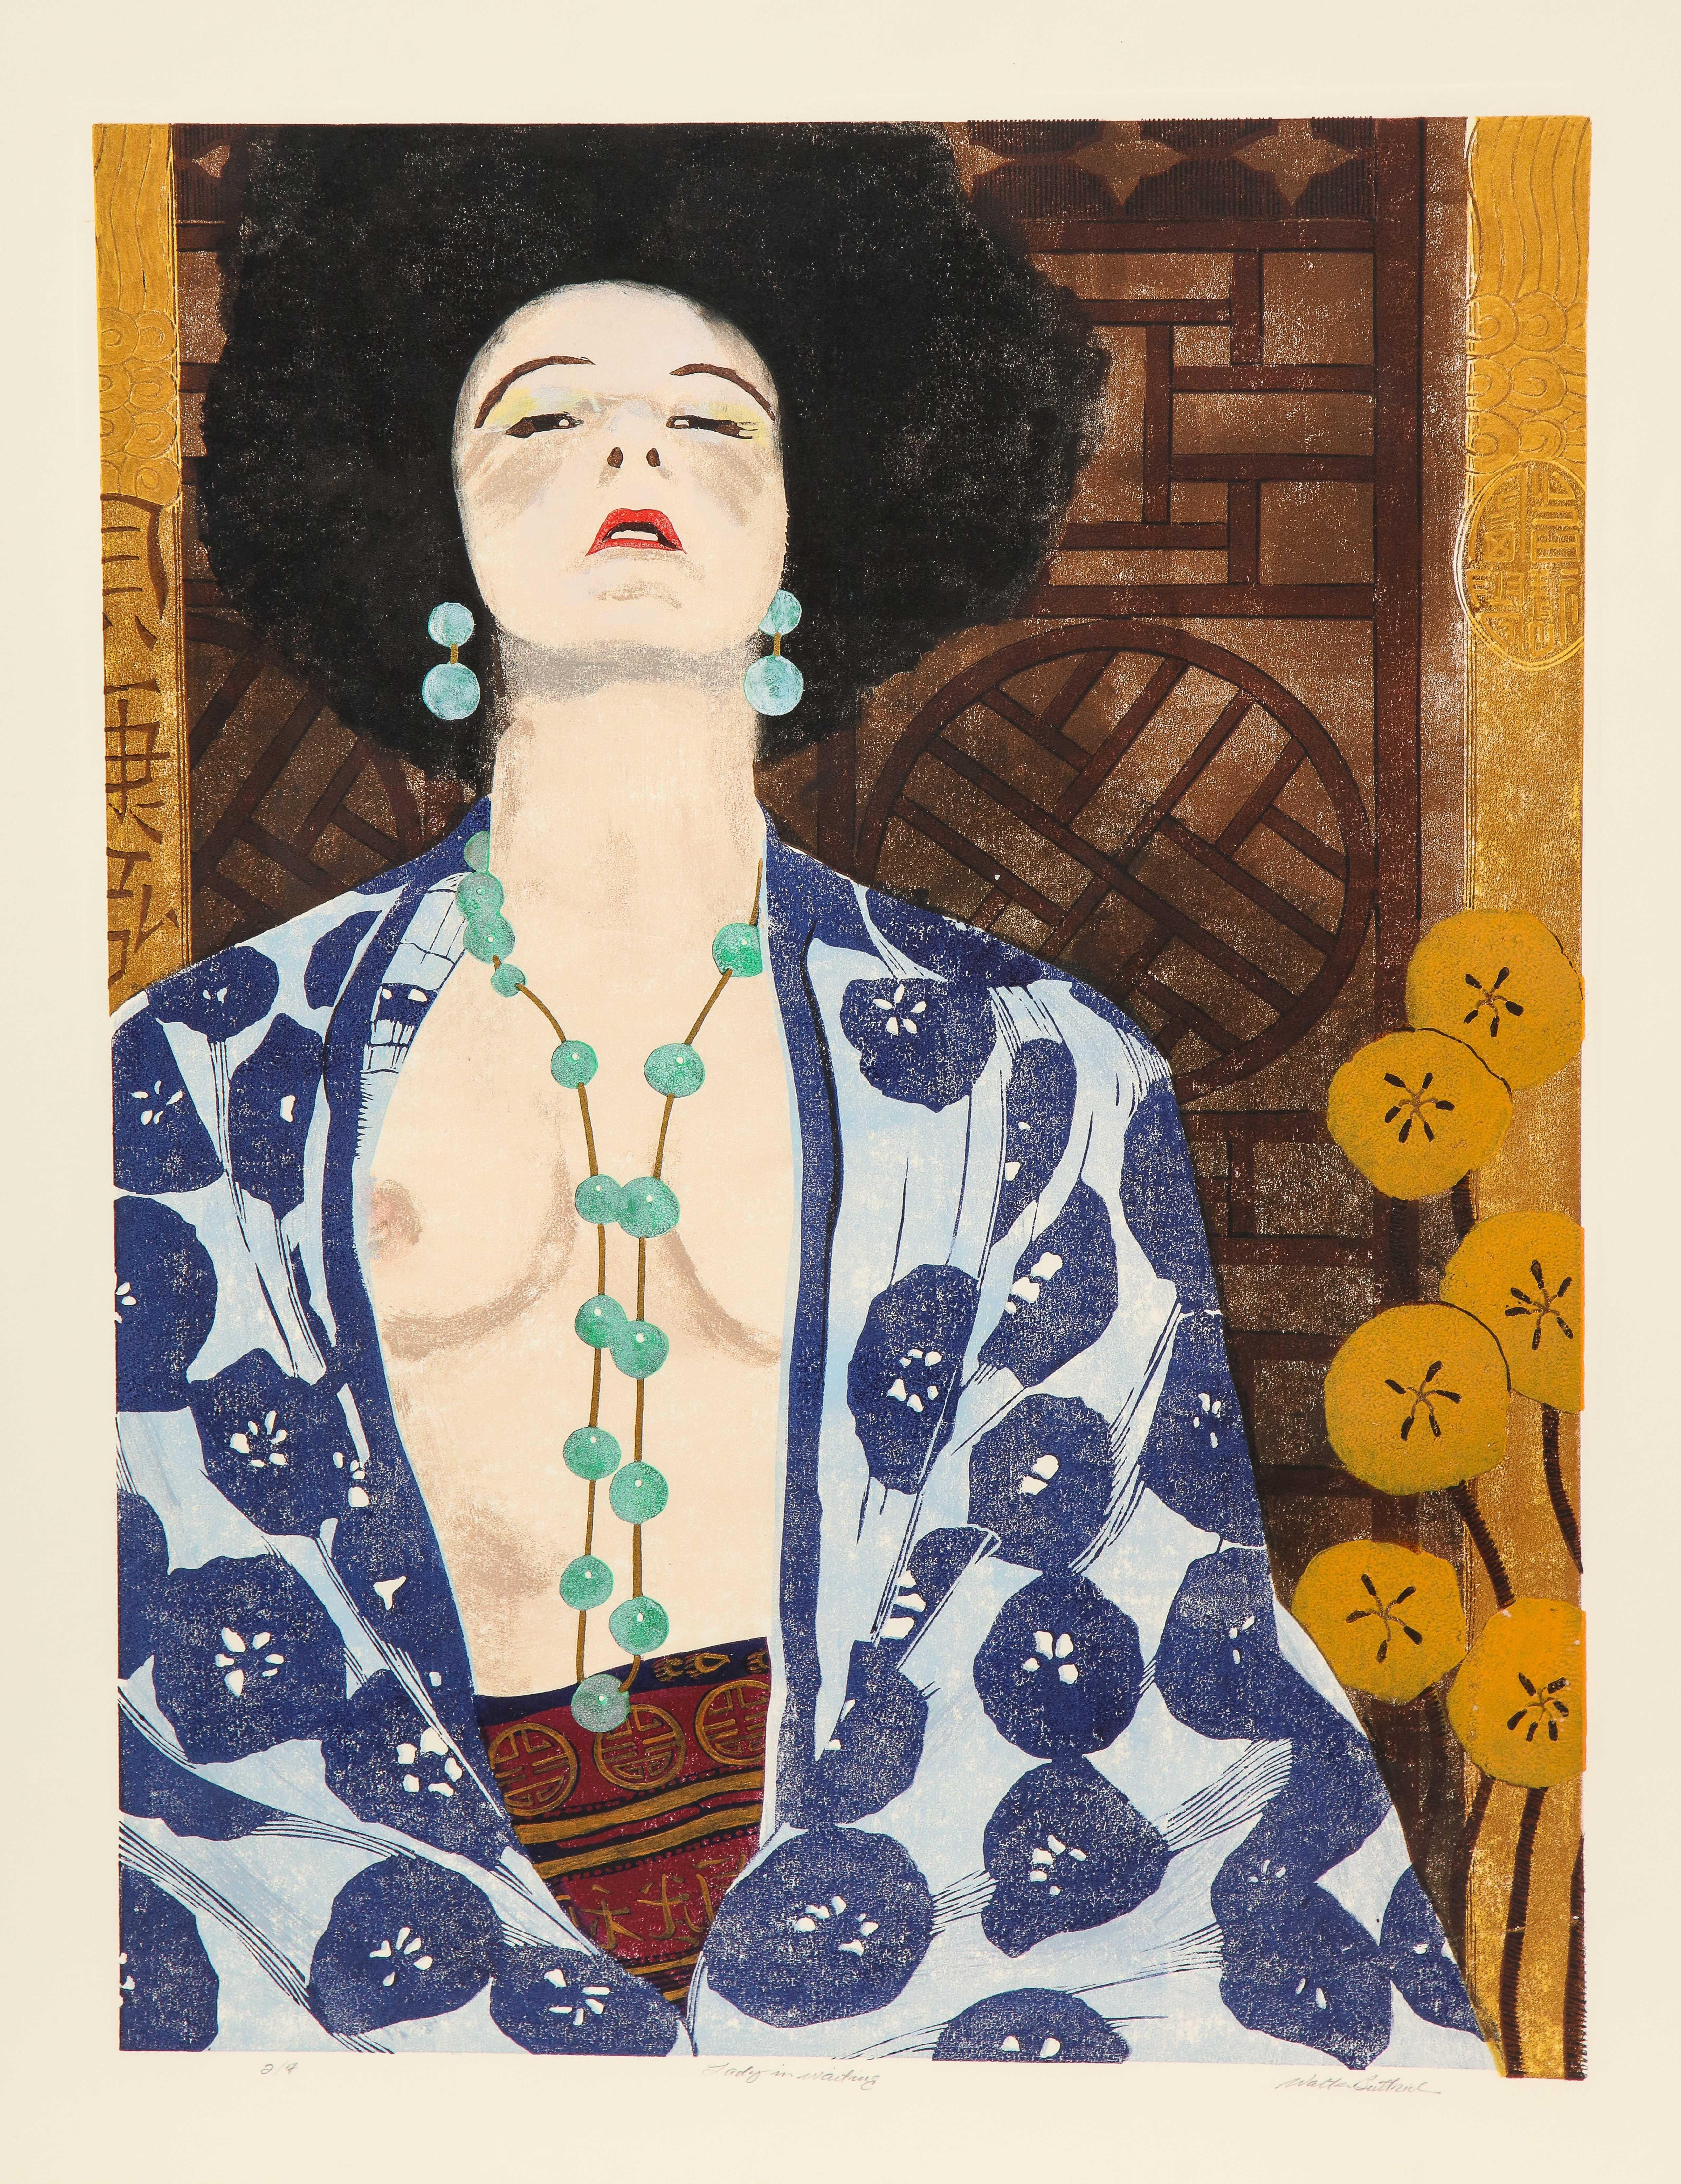 A wonderful print by the Bostonian artist that is a homage to Gustav Klimt and Japanese woodblock printing. The figure sits in the foreground partially dressed in a loose Kimono A necklace of turquoise beads cascade between her cleavage and match